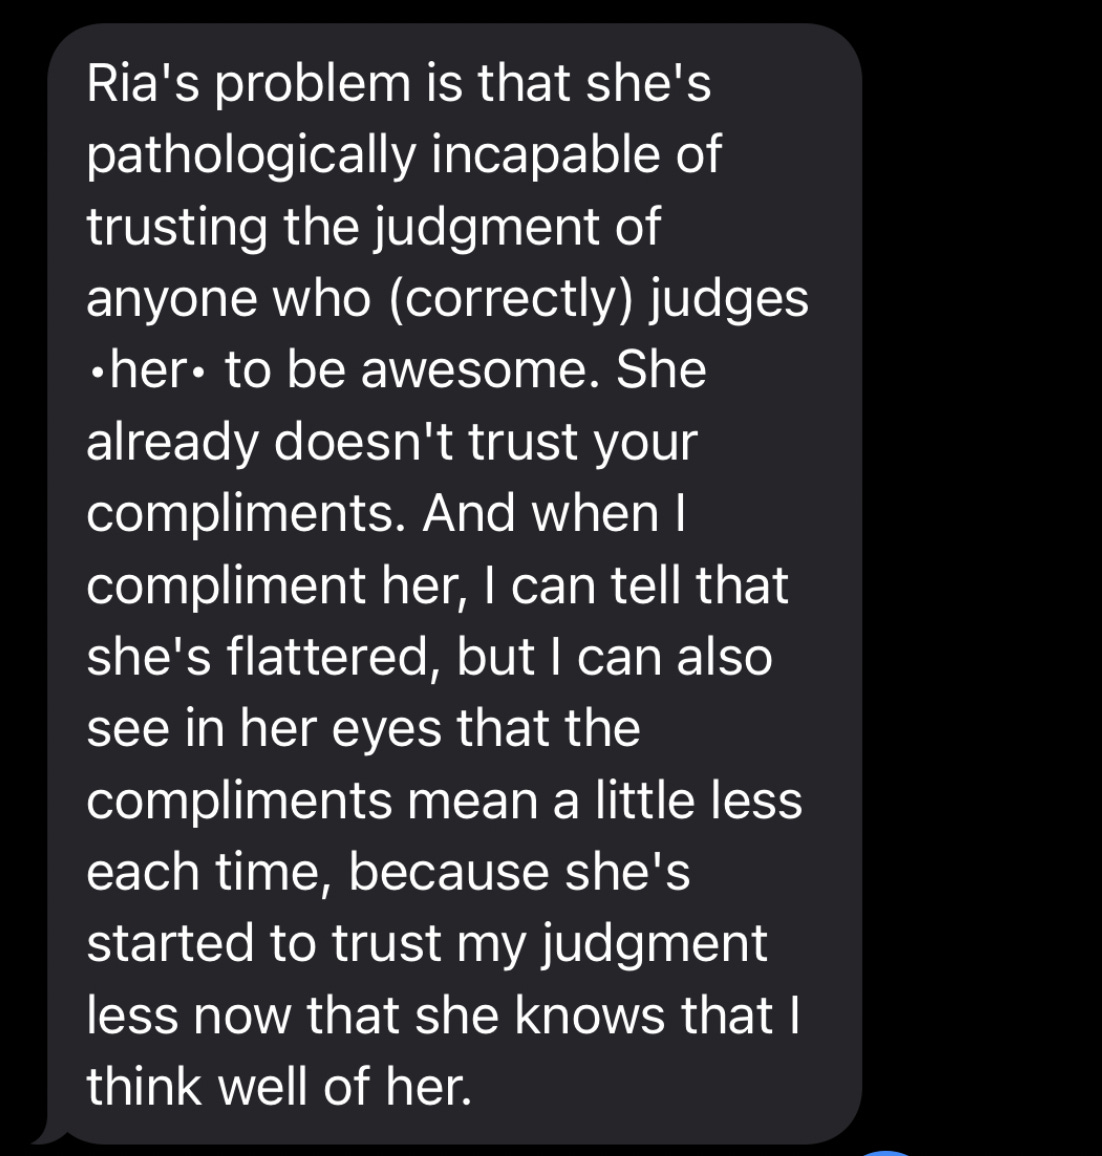 A mutual friend is describing her frustration with my inability to accept compliments (my friends call me "Ria").